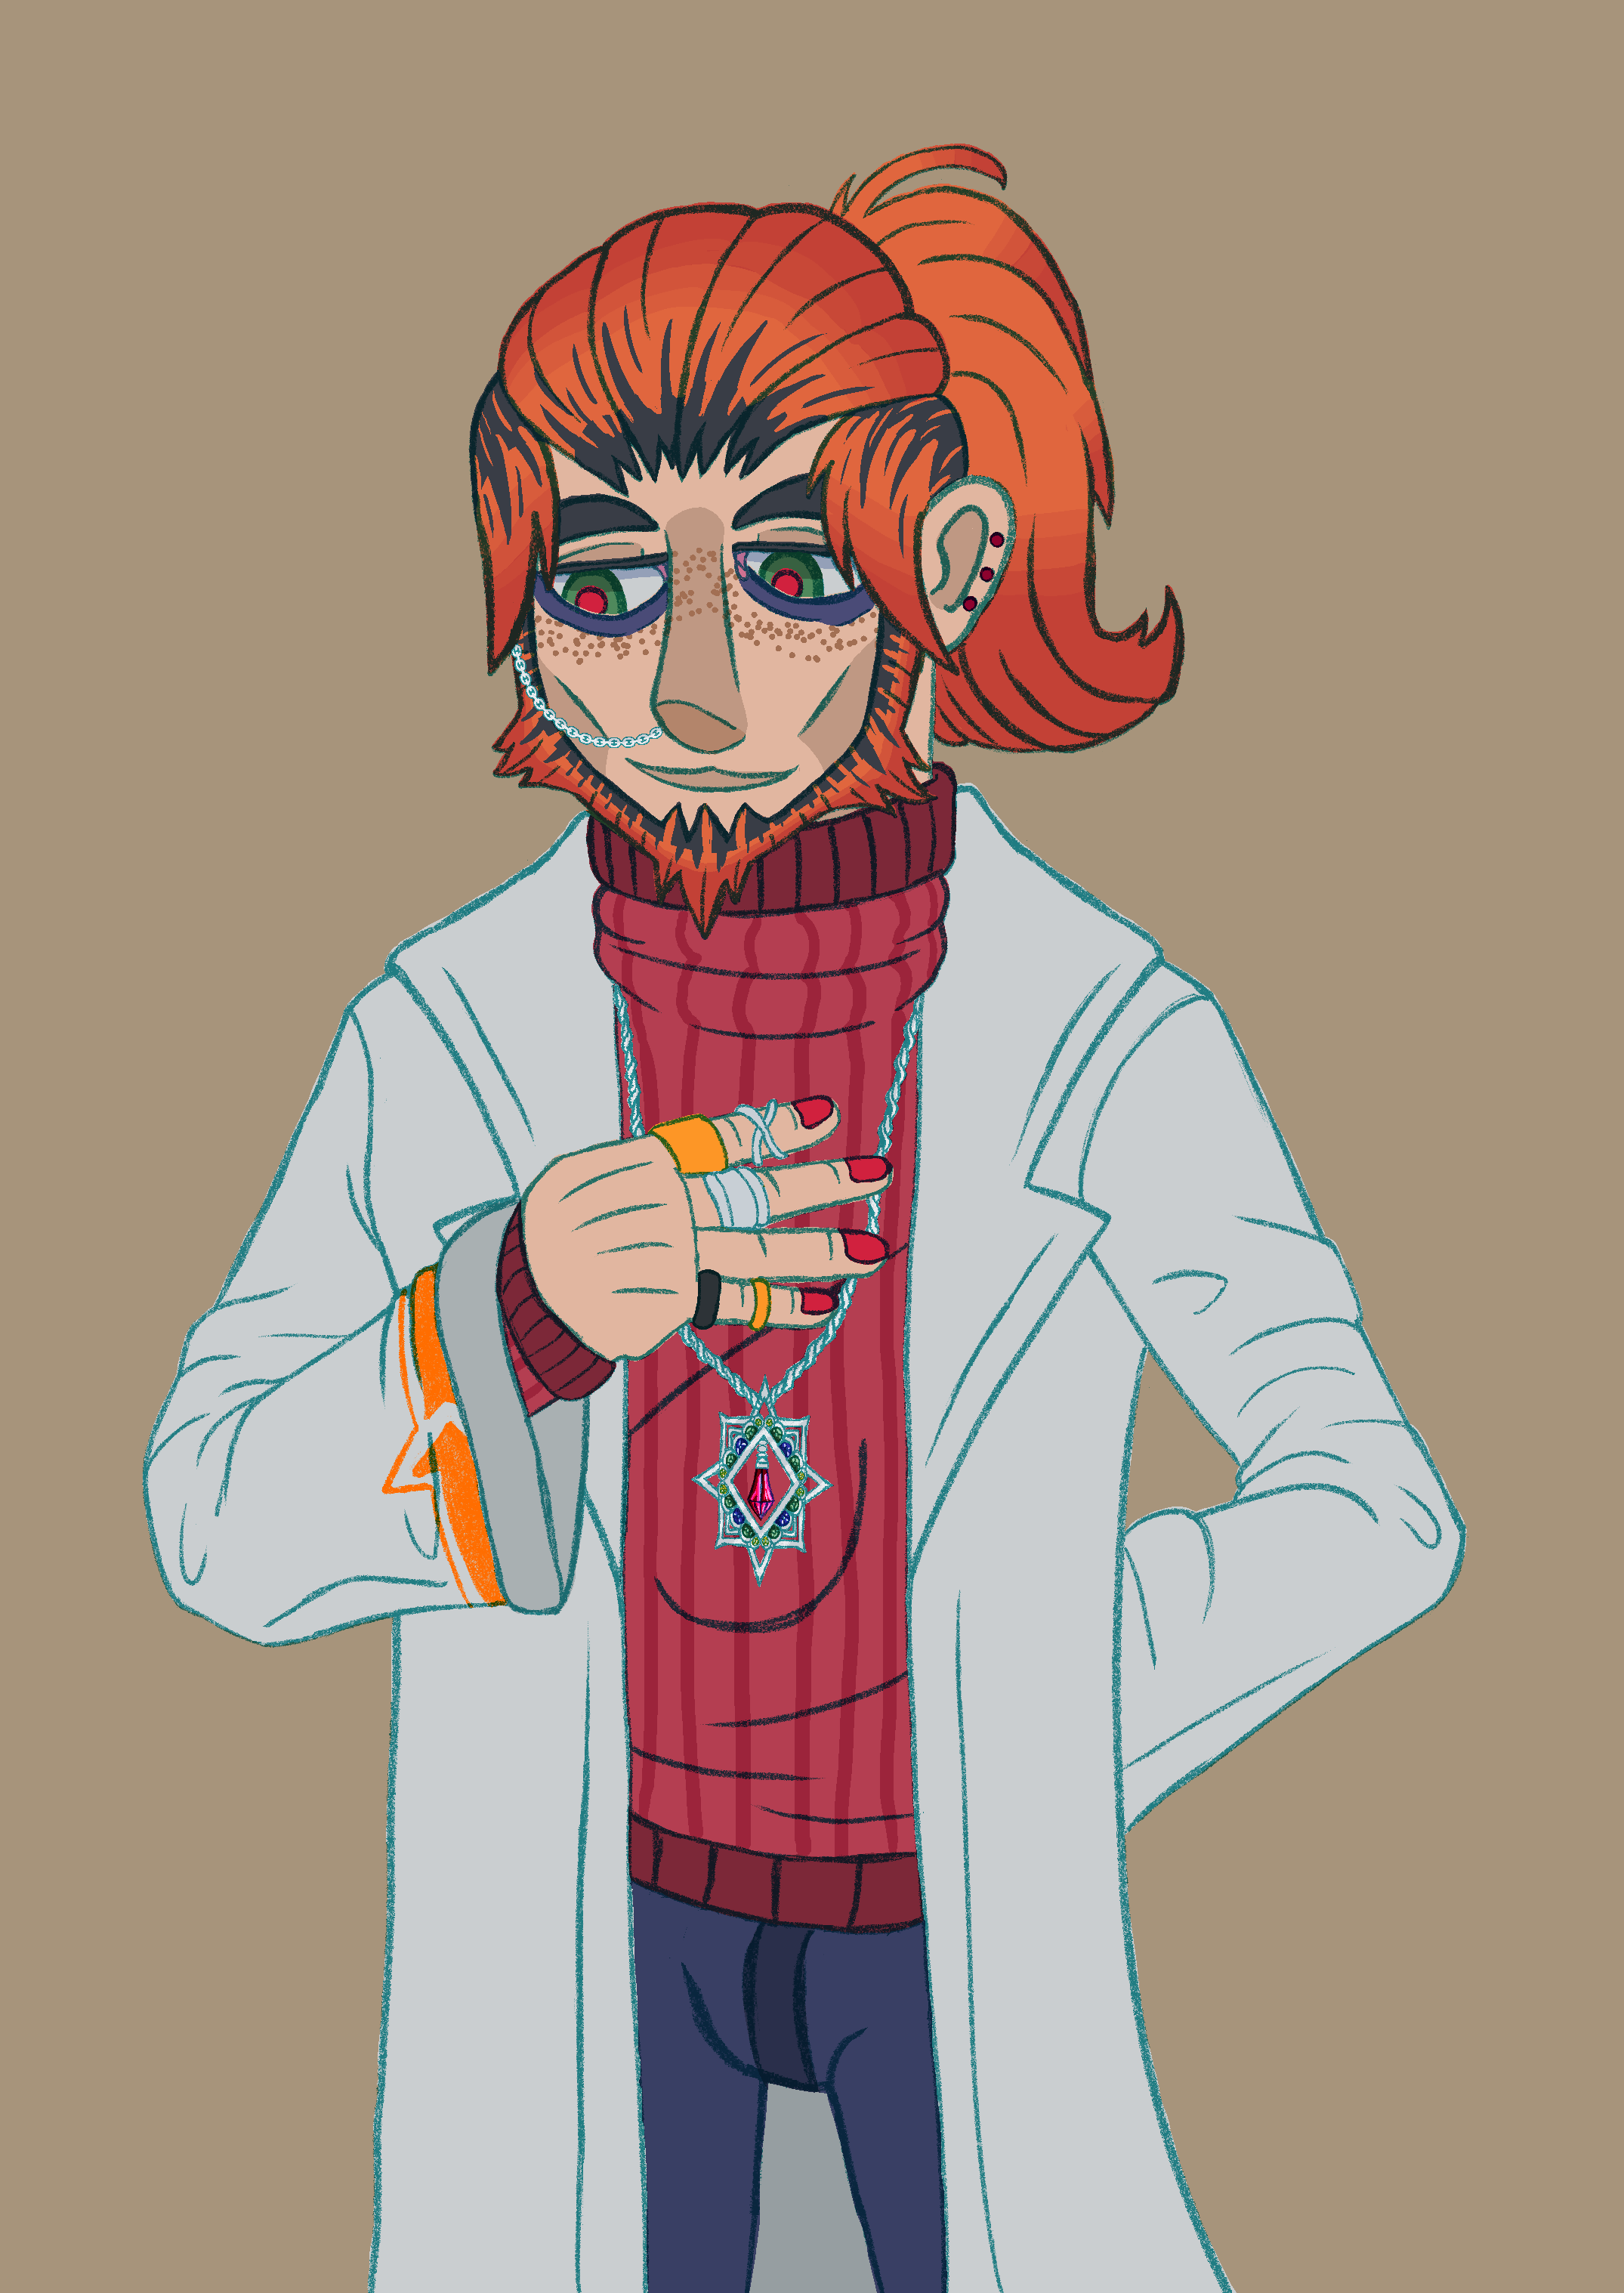 Art of Amaryllis. He is a slender person in a lab coat. He has strawberry blonde hair.